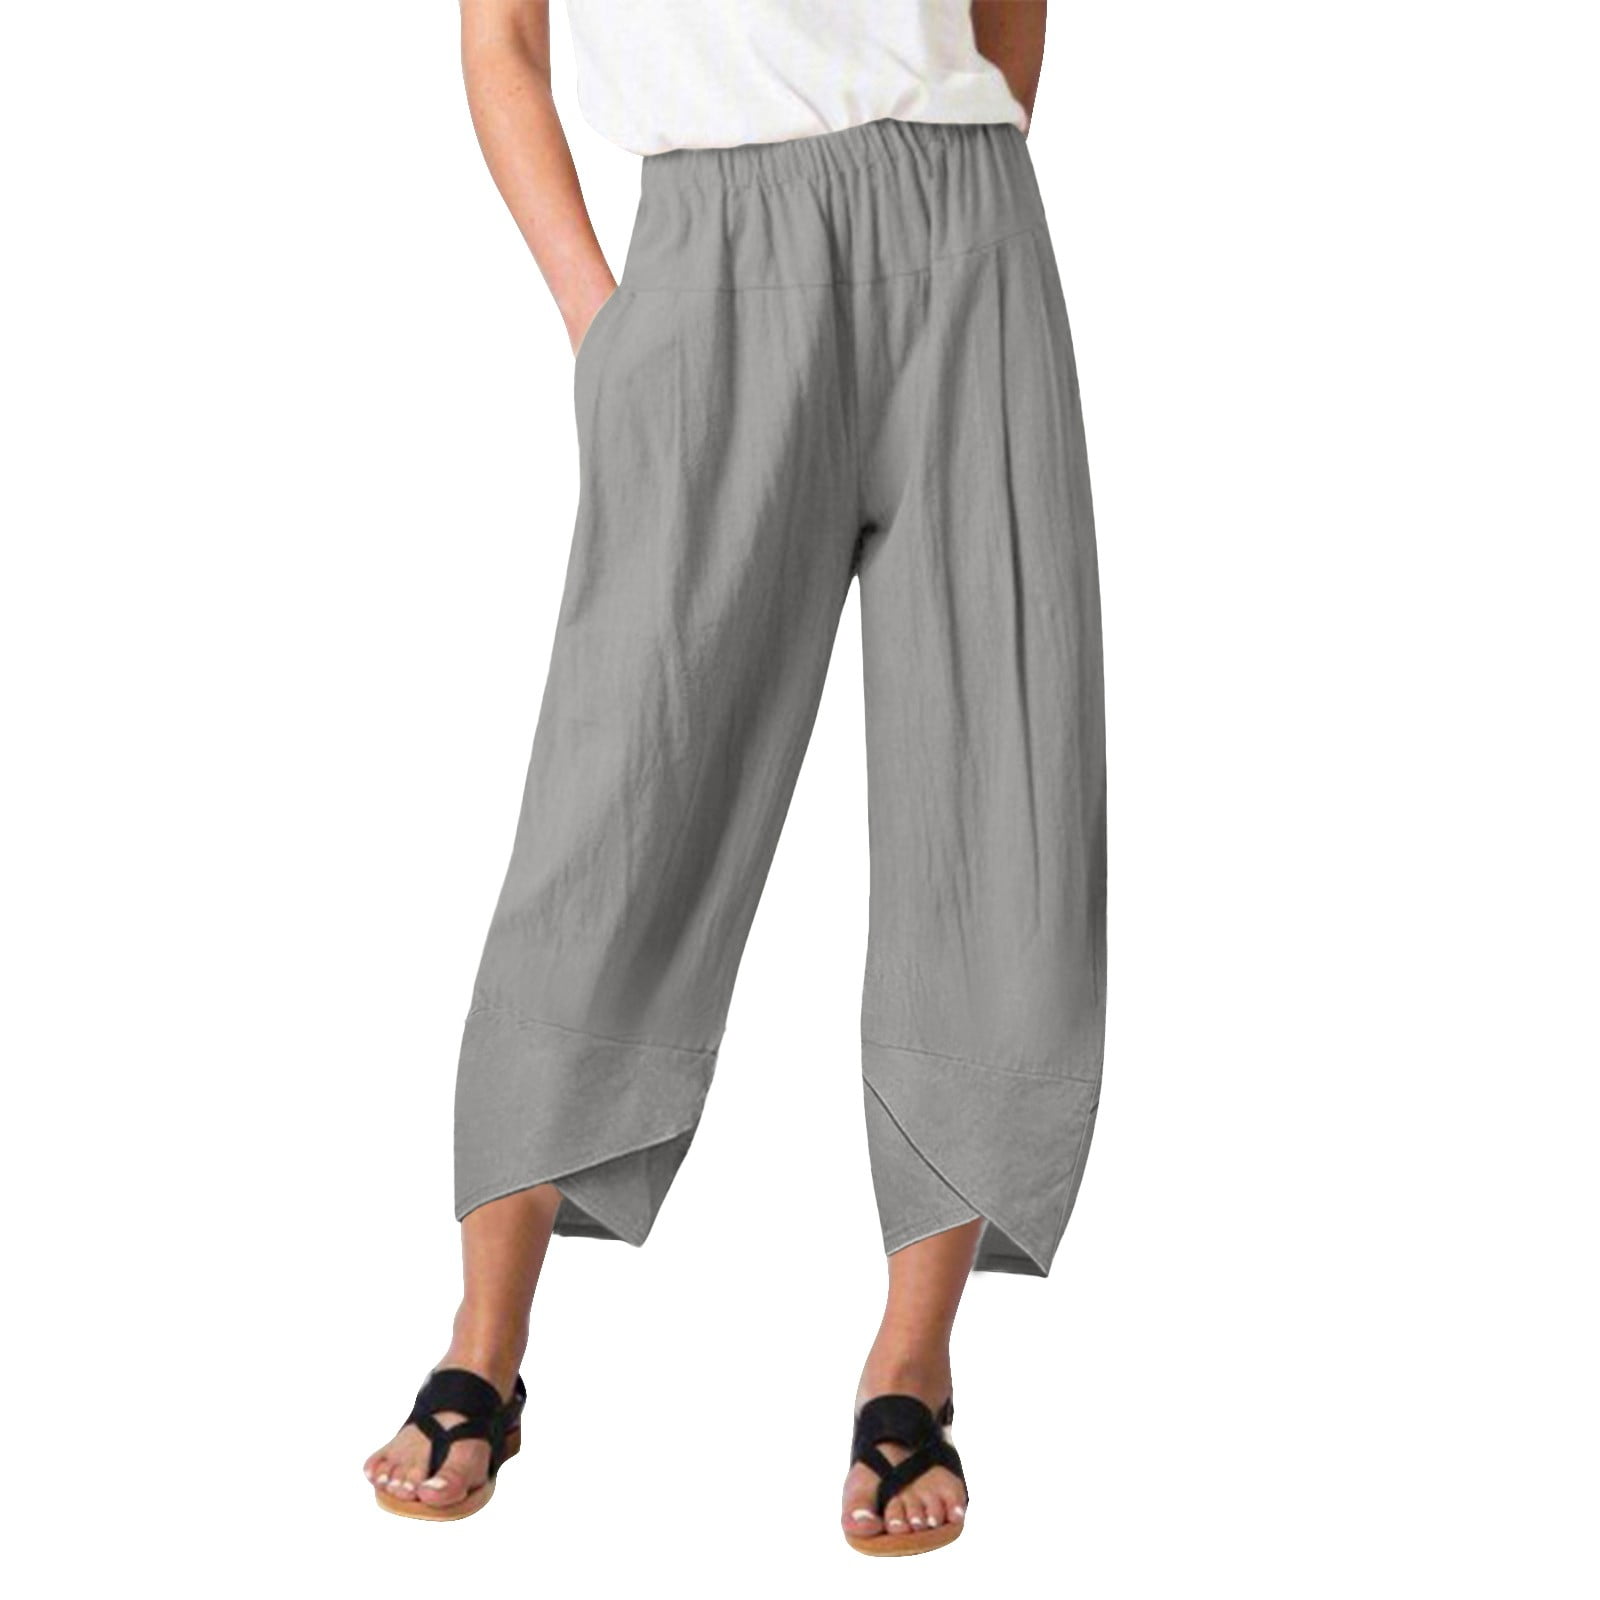 Pants for Women Women's Daily Casual Eight Length Trousers